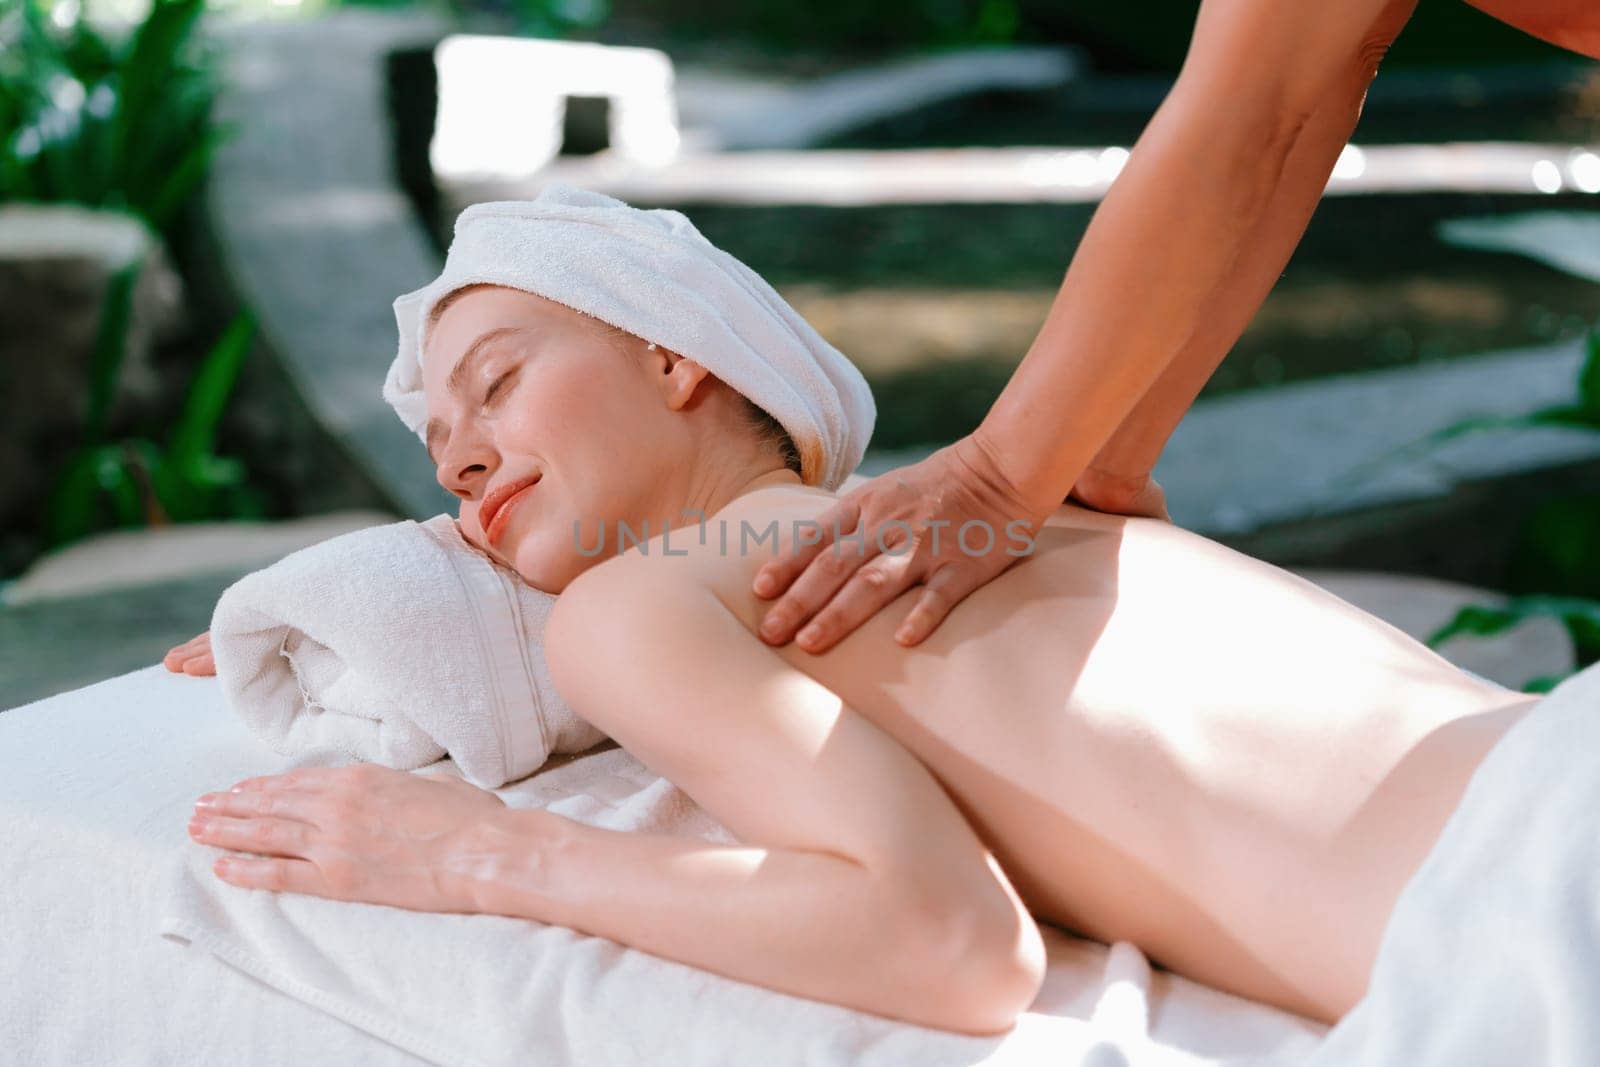 Beautiful young woman received a back massage on a spa bed from professional masseuse. Attractive female relaxes deeply by skilled hands of the massage therapist. Surrounded with nature. Tranquility.